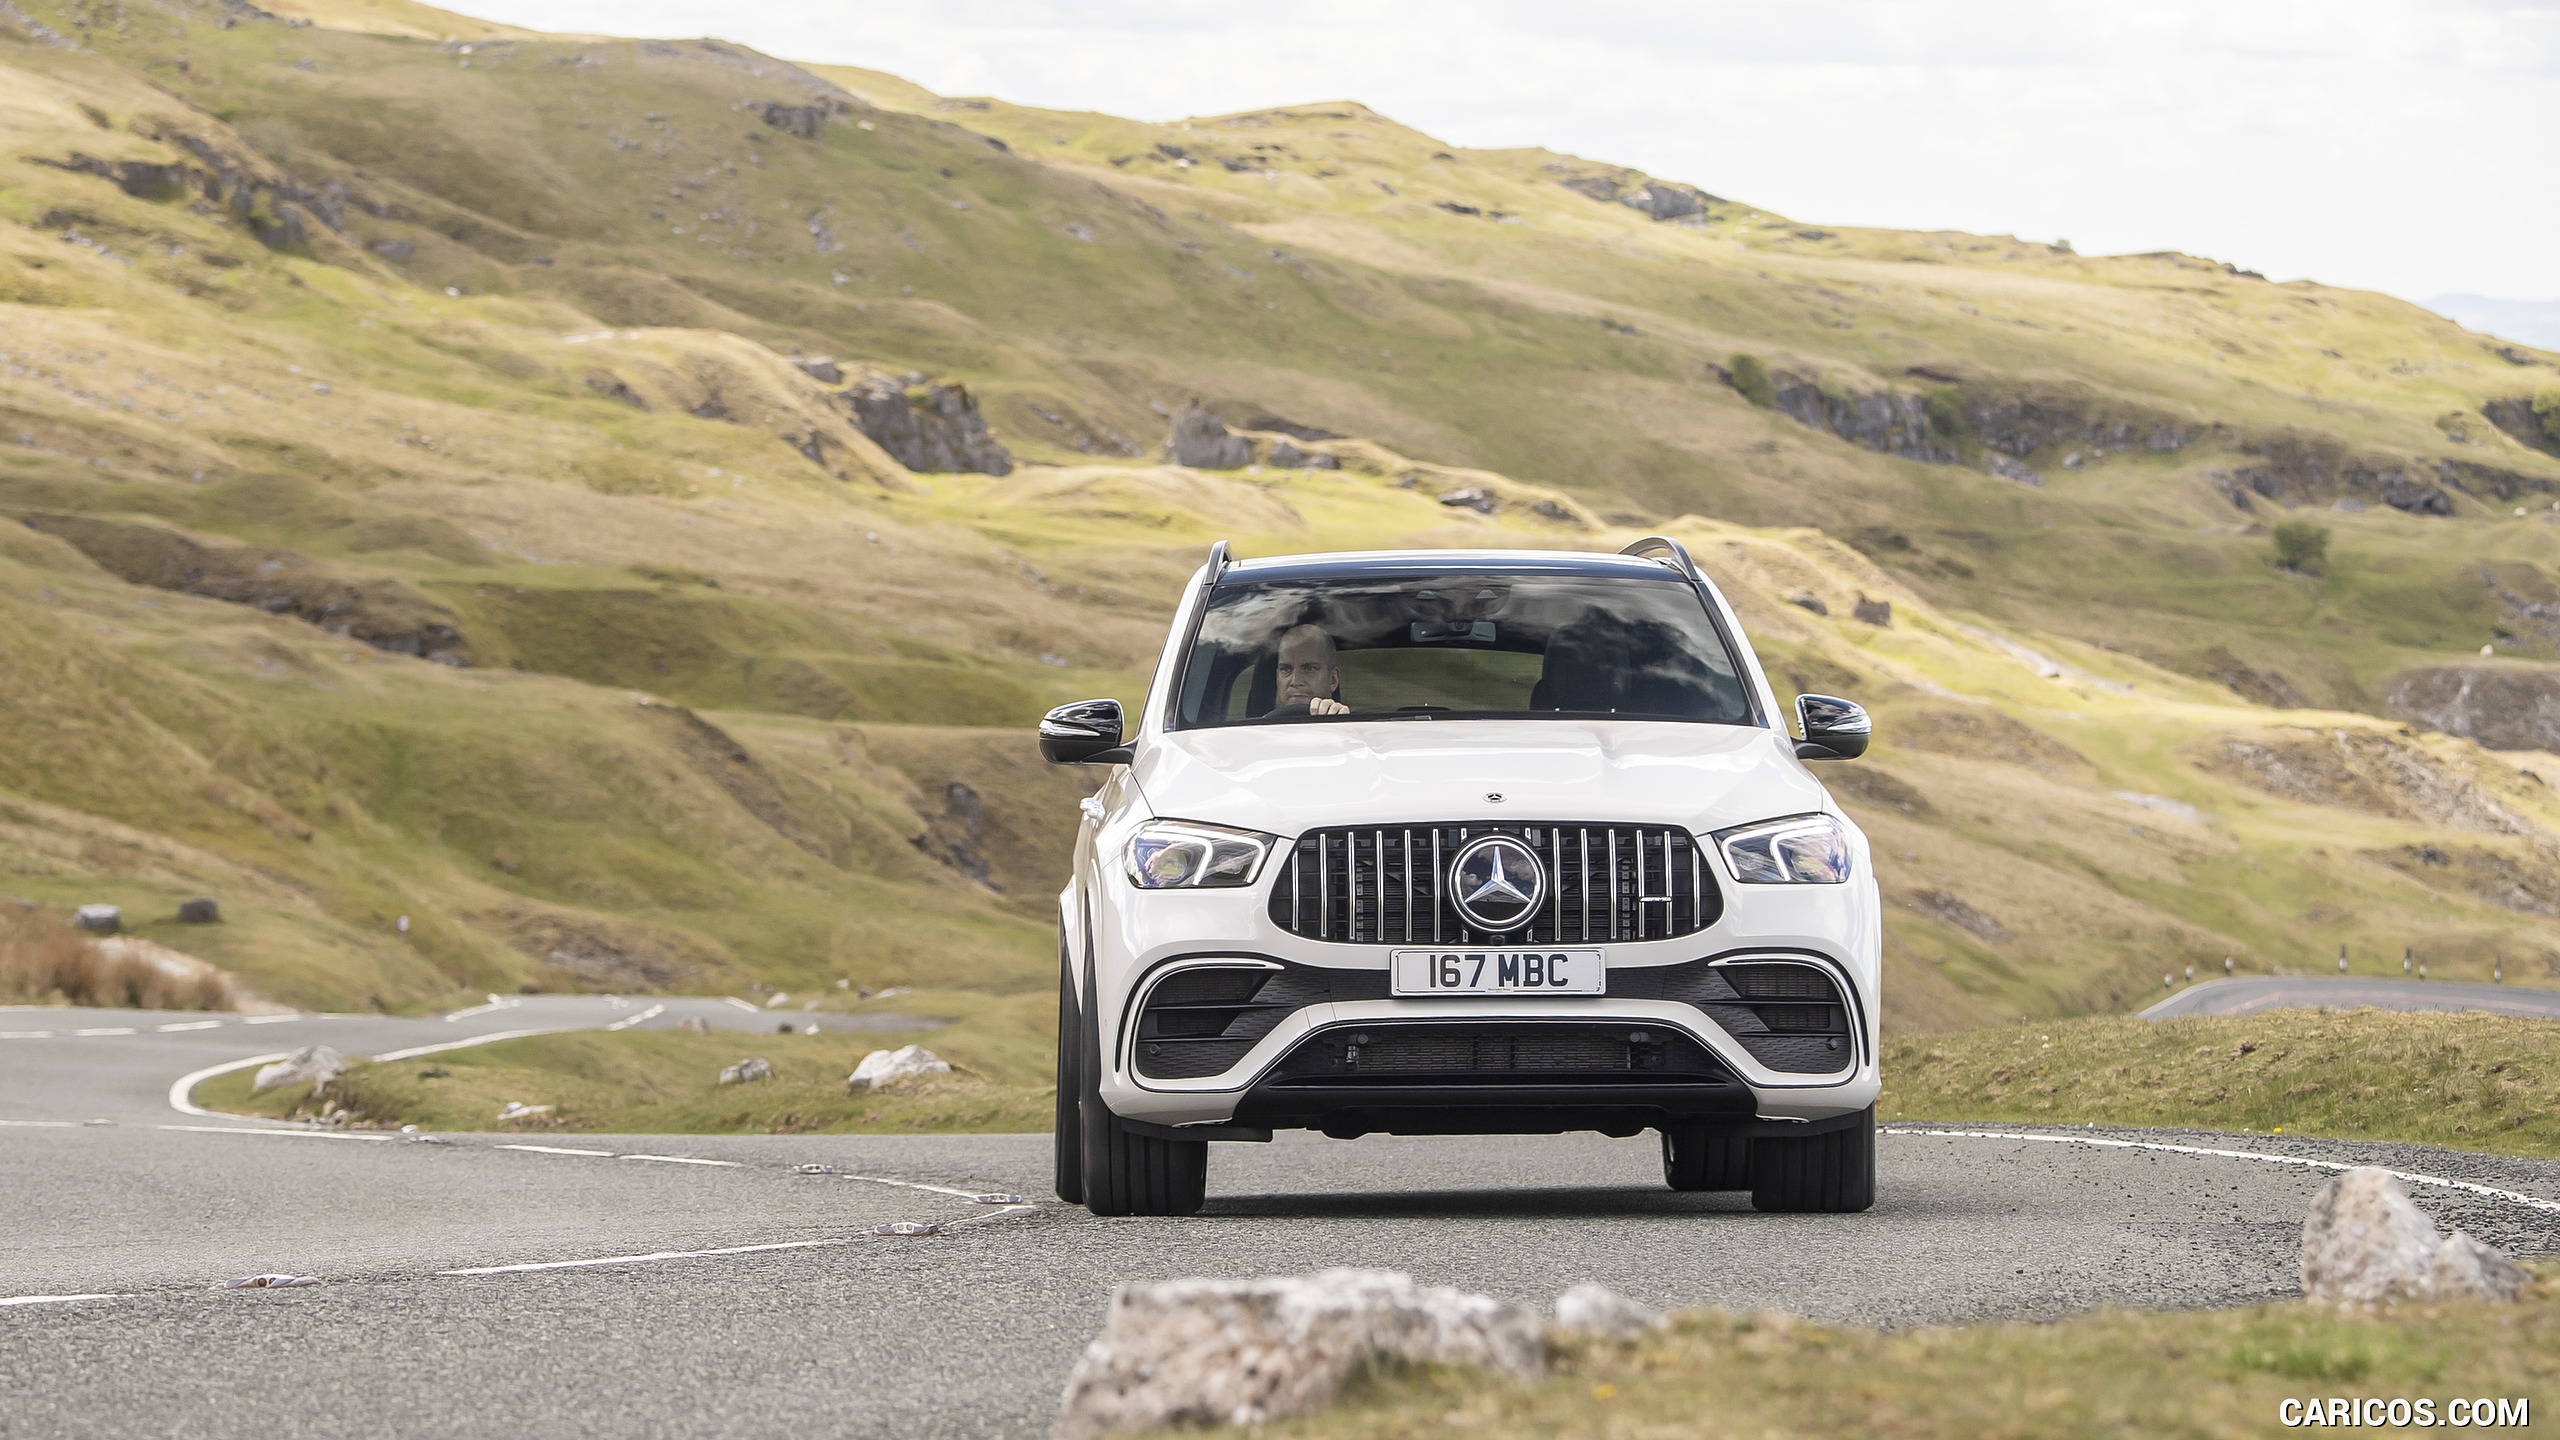 2021 Mercedes-AMG GLE 63 S 4MATIC (UK-Spec) - Front, #101 of 187